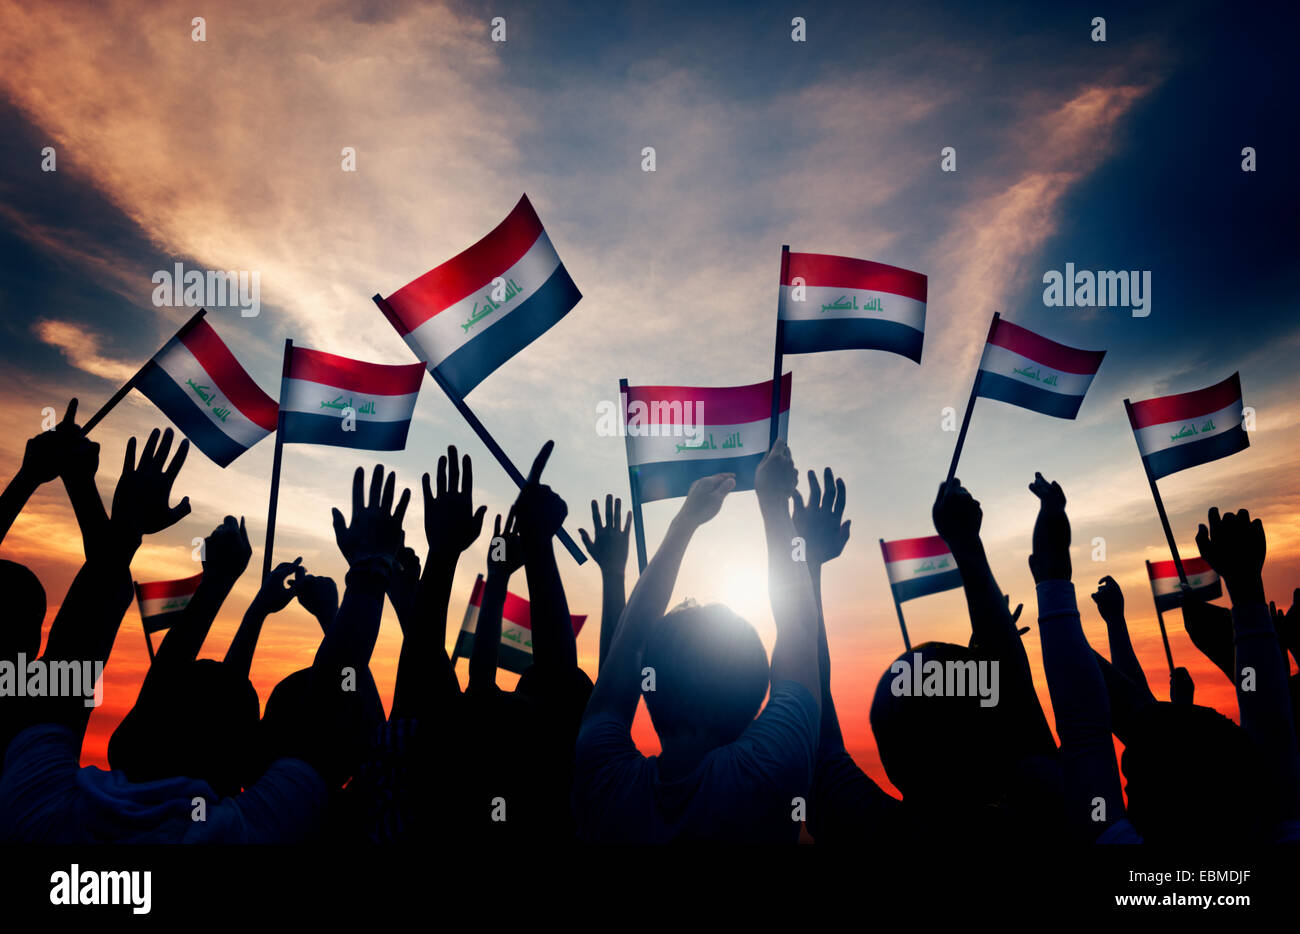 Silhouettes of People Waving the Flag of Iraq Stock Photo